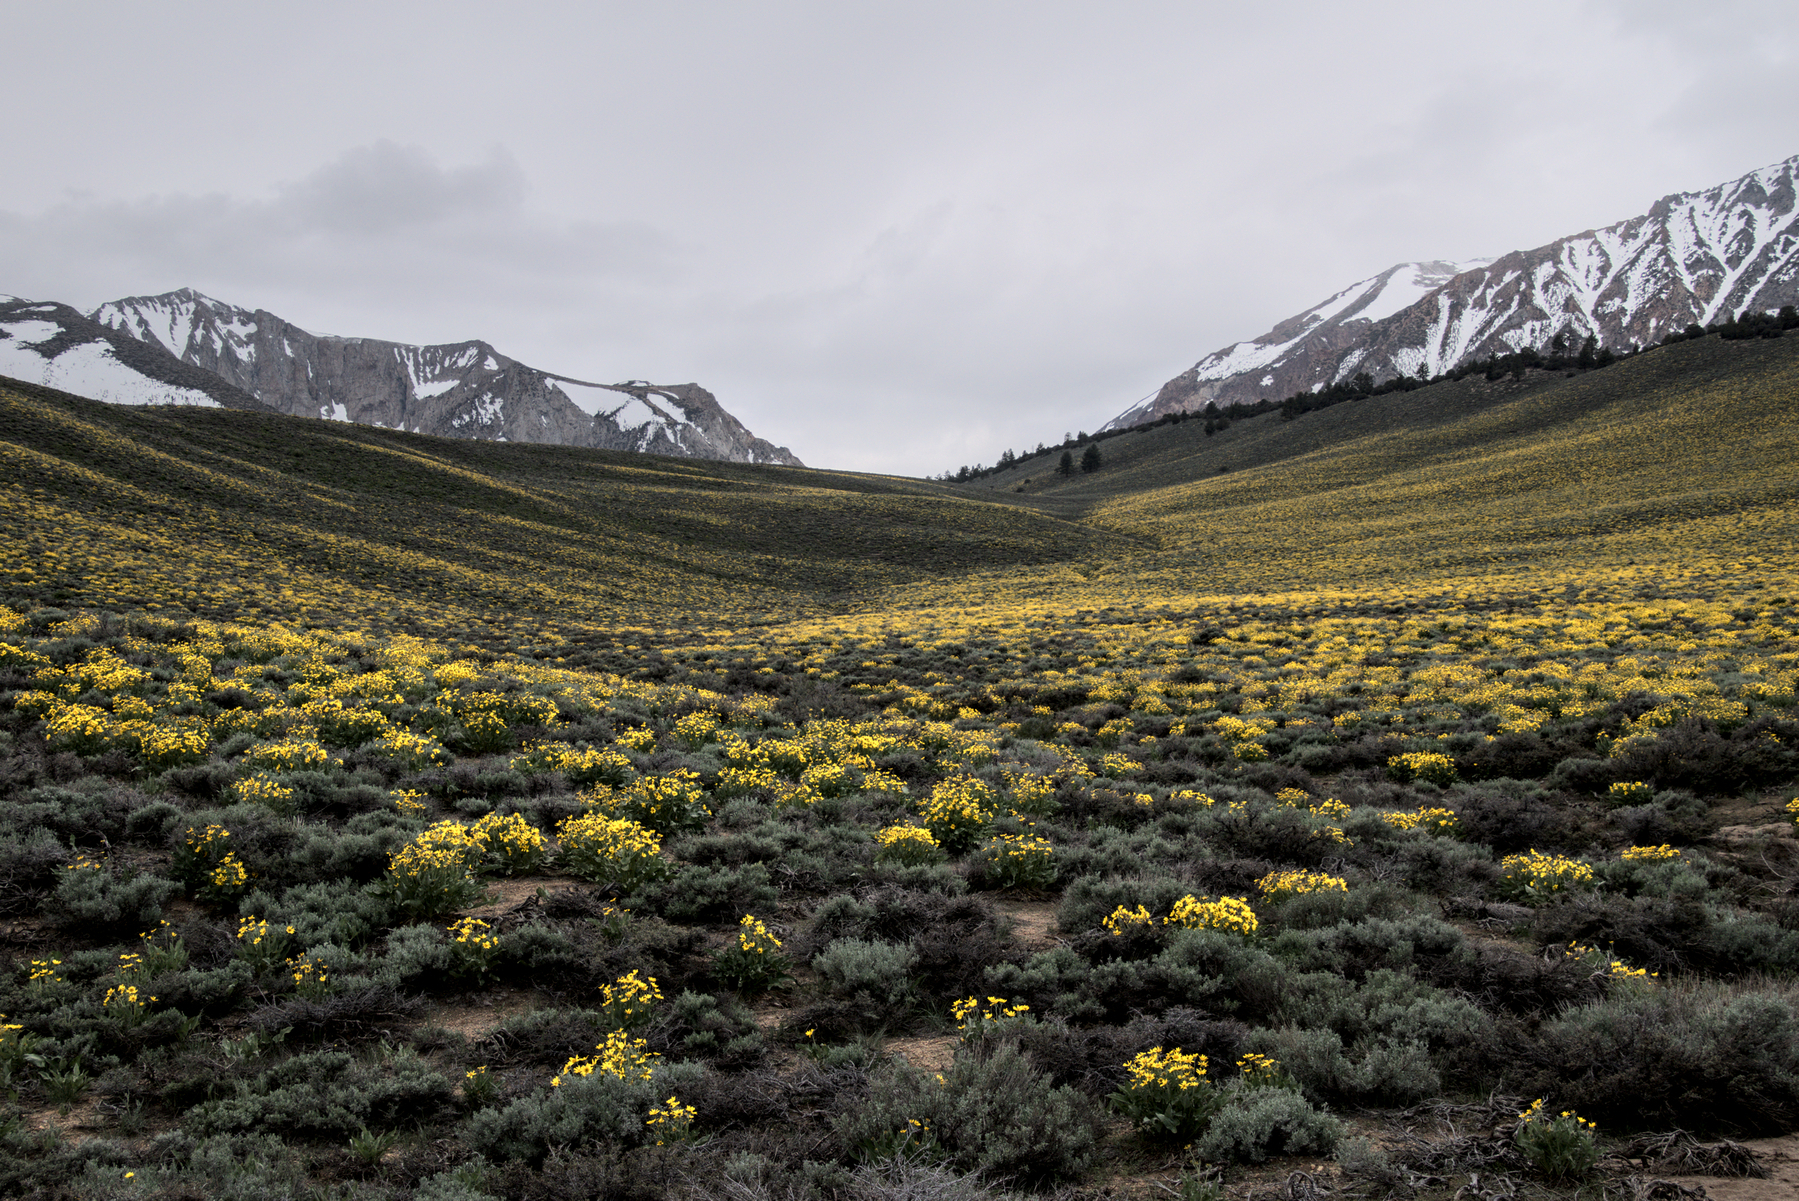 Yellow flowers fill a wide valley descending from partially snow-covered peaks.